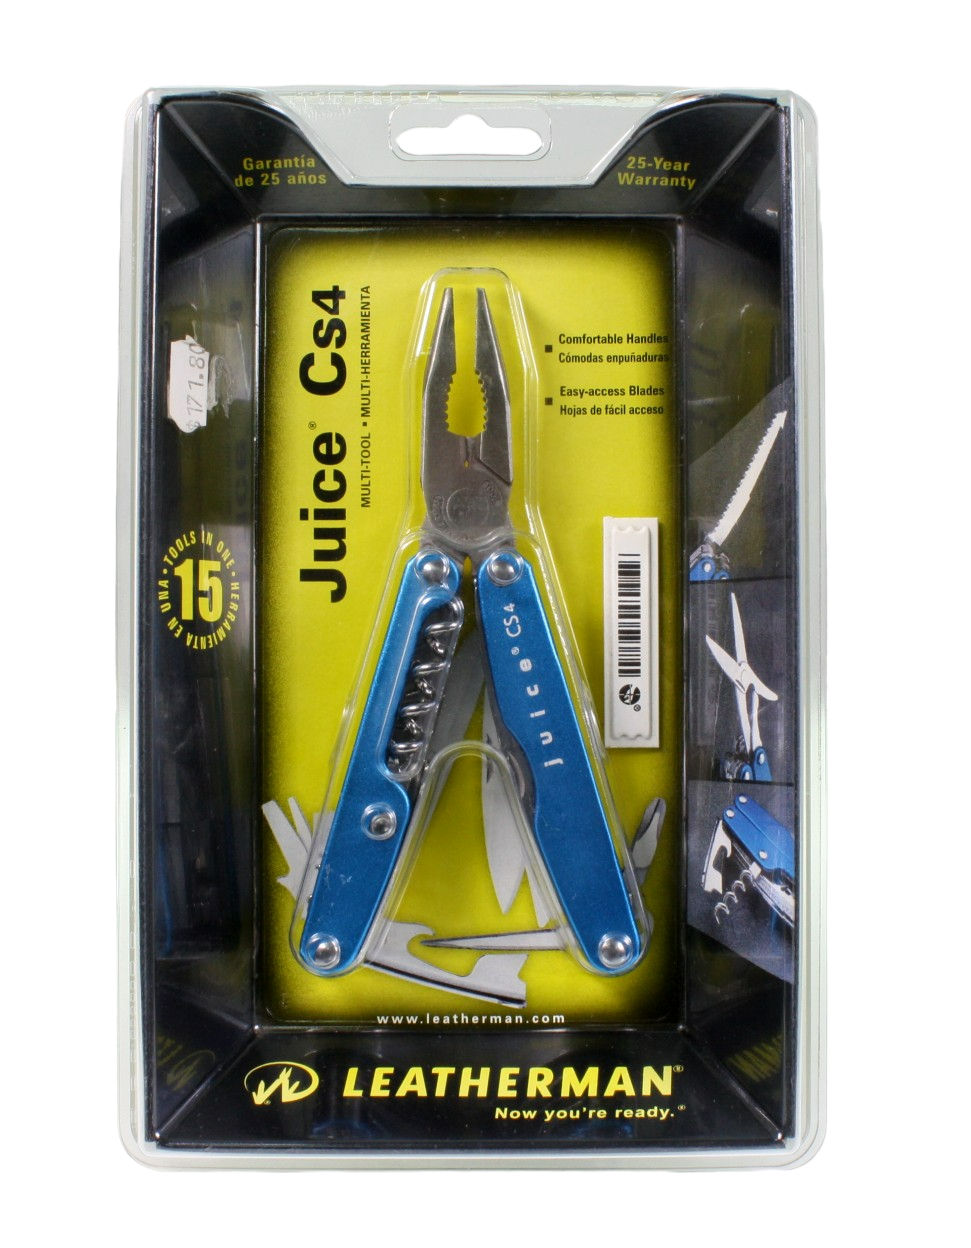 Leatherman in packet